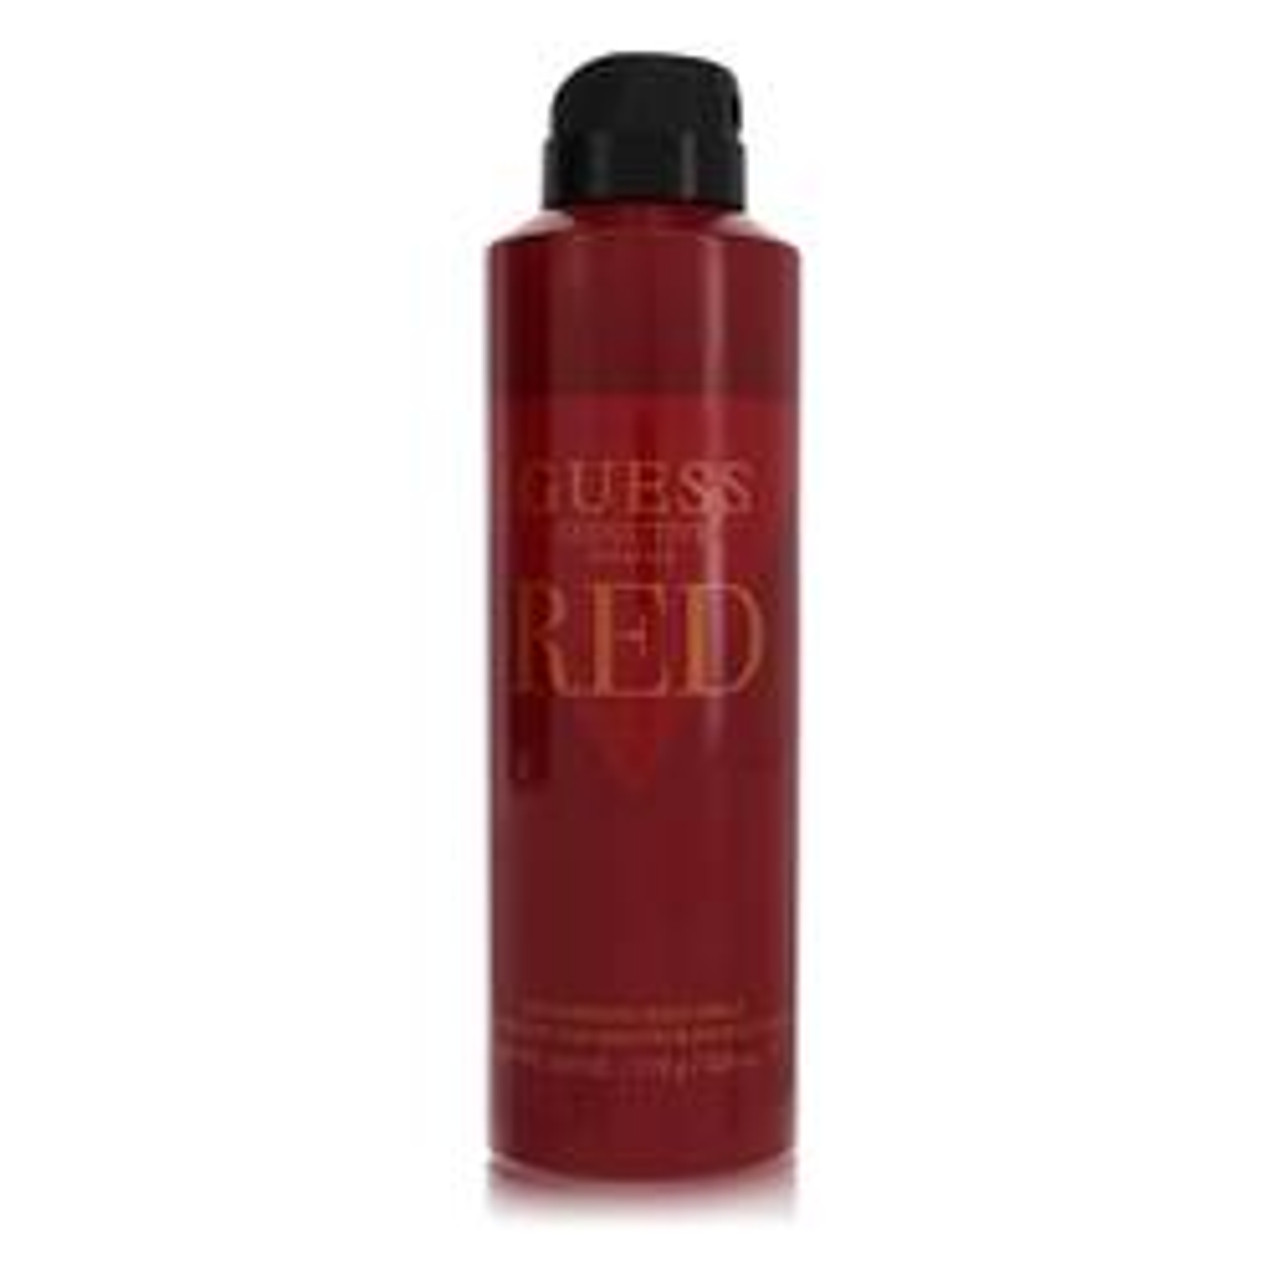 Guess Seductive Homme Red Cologne By Guess Body Spray 6 oz for Men - [From 27.00 - Choose pk Qty ] - *Ships from Miami